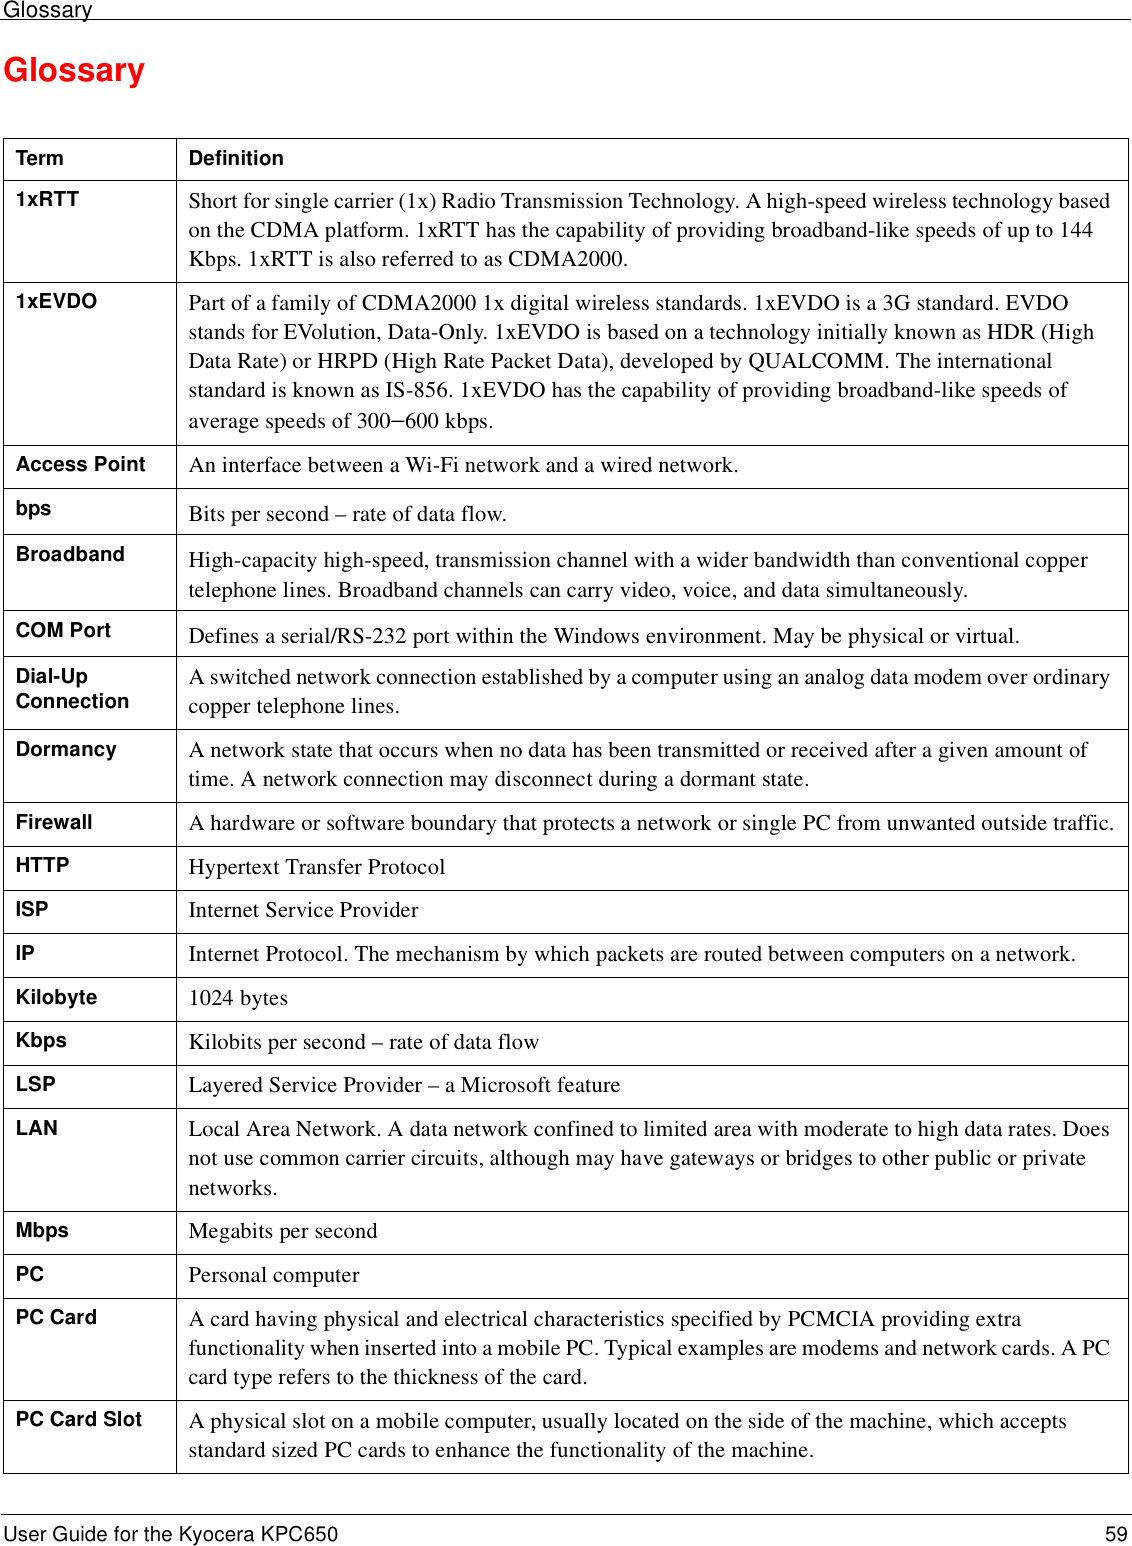 GlossaryUser Guide for the Kyocera KPC650 59 GlossaryTerm Definition1xRTT Short for single carrier (1x) Radio Transmission Technology. A high-speed wireless technology based on the CDMA platform. 1xRTT has the capability of providing broadband-like speeds of up to 144 Kbps. 1xRTT is also referred to as CDMA2000.1xEVDO Part of a family of CDMA2000 1x digital wireless standards. 1xEVDO is a 3G standard. EVDO stands for EVolution, Data-Only. 1xEVDO is based on a technology initially known as HDR (High Data Rate) or HRPD (High Rate Packet Data), developed by QUALCOMM. The international standard is known as IS-856. 1xEVDO has the capability of providing broadband-like speeds of average speeds of 300−600 kbps.Access Point An interface between a Wi-Fi network and a wired network.bps Bits per second – rate of data flow.Broadband High-capacity high-speed, transmission channel with a wider bandwidth than conventional copper telephone lines. Broadband channels can carry video, voice, and data simultaneously.COM Port Defines a serial/RS-232 port within the Windows environment. May be physical or virtual.Dial-Up Connection A switched network connection established by a computer using an analog data modem over ordinary copper telephone lines.Dormancy A network state that occurs when no data has been transmitted or received after a given amount of time. A network connection may disconnect during a dormant state.Firewall A hardware or software boundary that protects a network or single PC from unwanted outside traffic.HTTP Hypertext Transfer ProtocolISP Internet Service ProviderIP Internet Protocol. The mechanism by which packets are routed between computers on a network.Kilobyte 1024 bytesKbps Kilobits per second – rate of data flowLSP Layered Service Provider – a Microsoft featureLAN Local Area Network. A data network confined to limited area with moderate to high data rates. Does not use common carrier circuits, although may have gateways or bridges to other public or private networks.Mbps Megabits per secondPC Personal computerPC Card A card having physical and electrical characteristics specified by PCMCIA providing extra functionality when inserted into a mobile PC. Typical examples are modems and network cards. A PC card type refers to the thickness of the card.PC Card Slot A physical slot on a mobile computer, usually located on the side of the machine, which accepts standard sized PC cards to enhance the functionality of the machine.